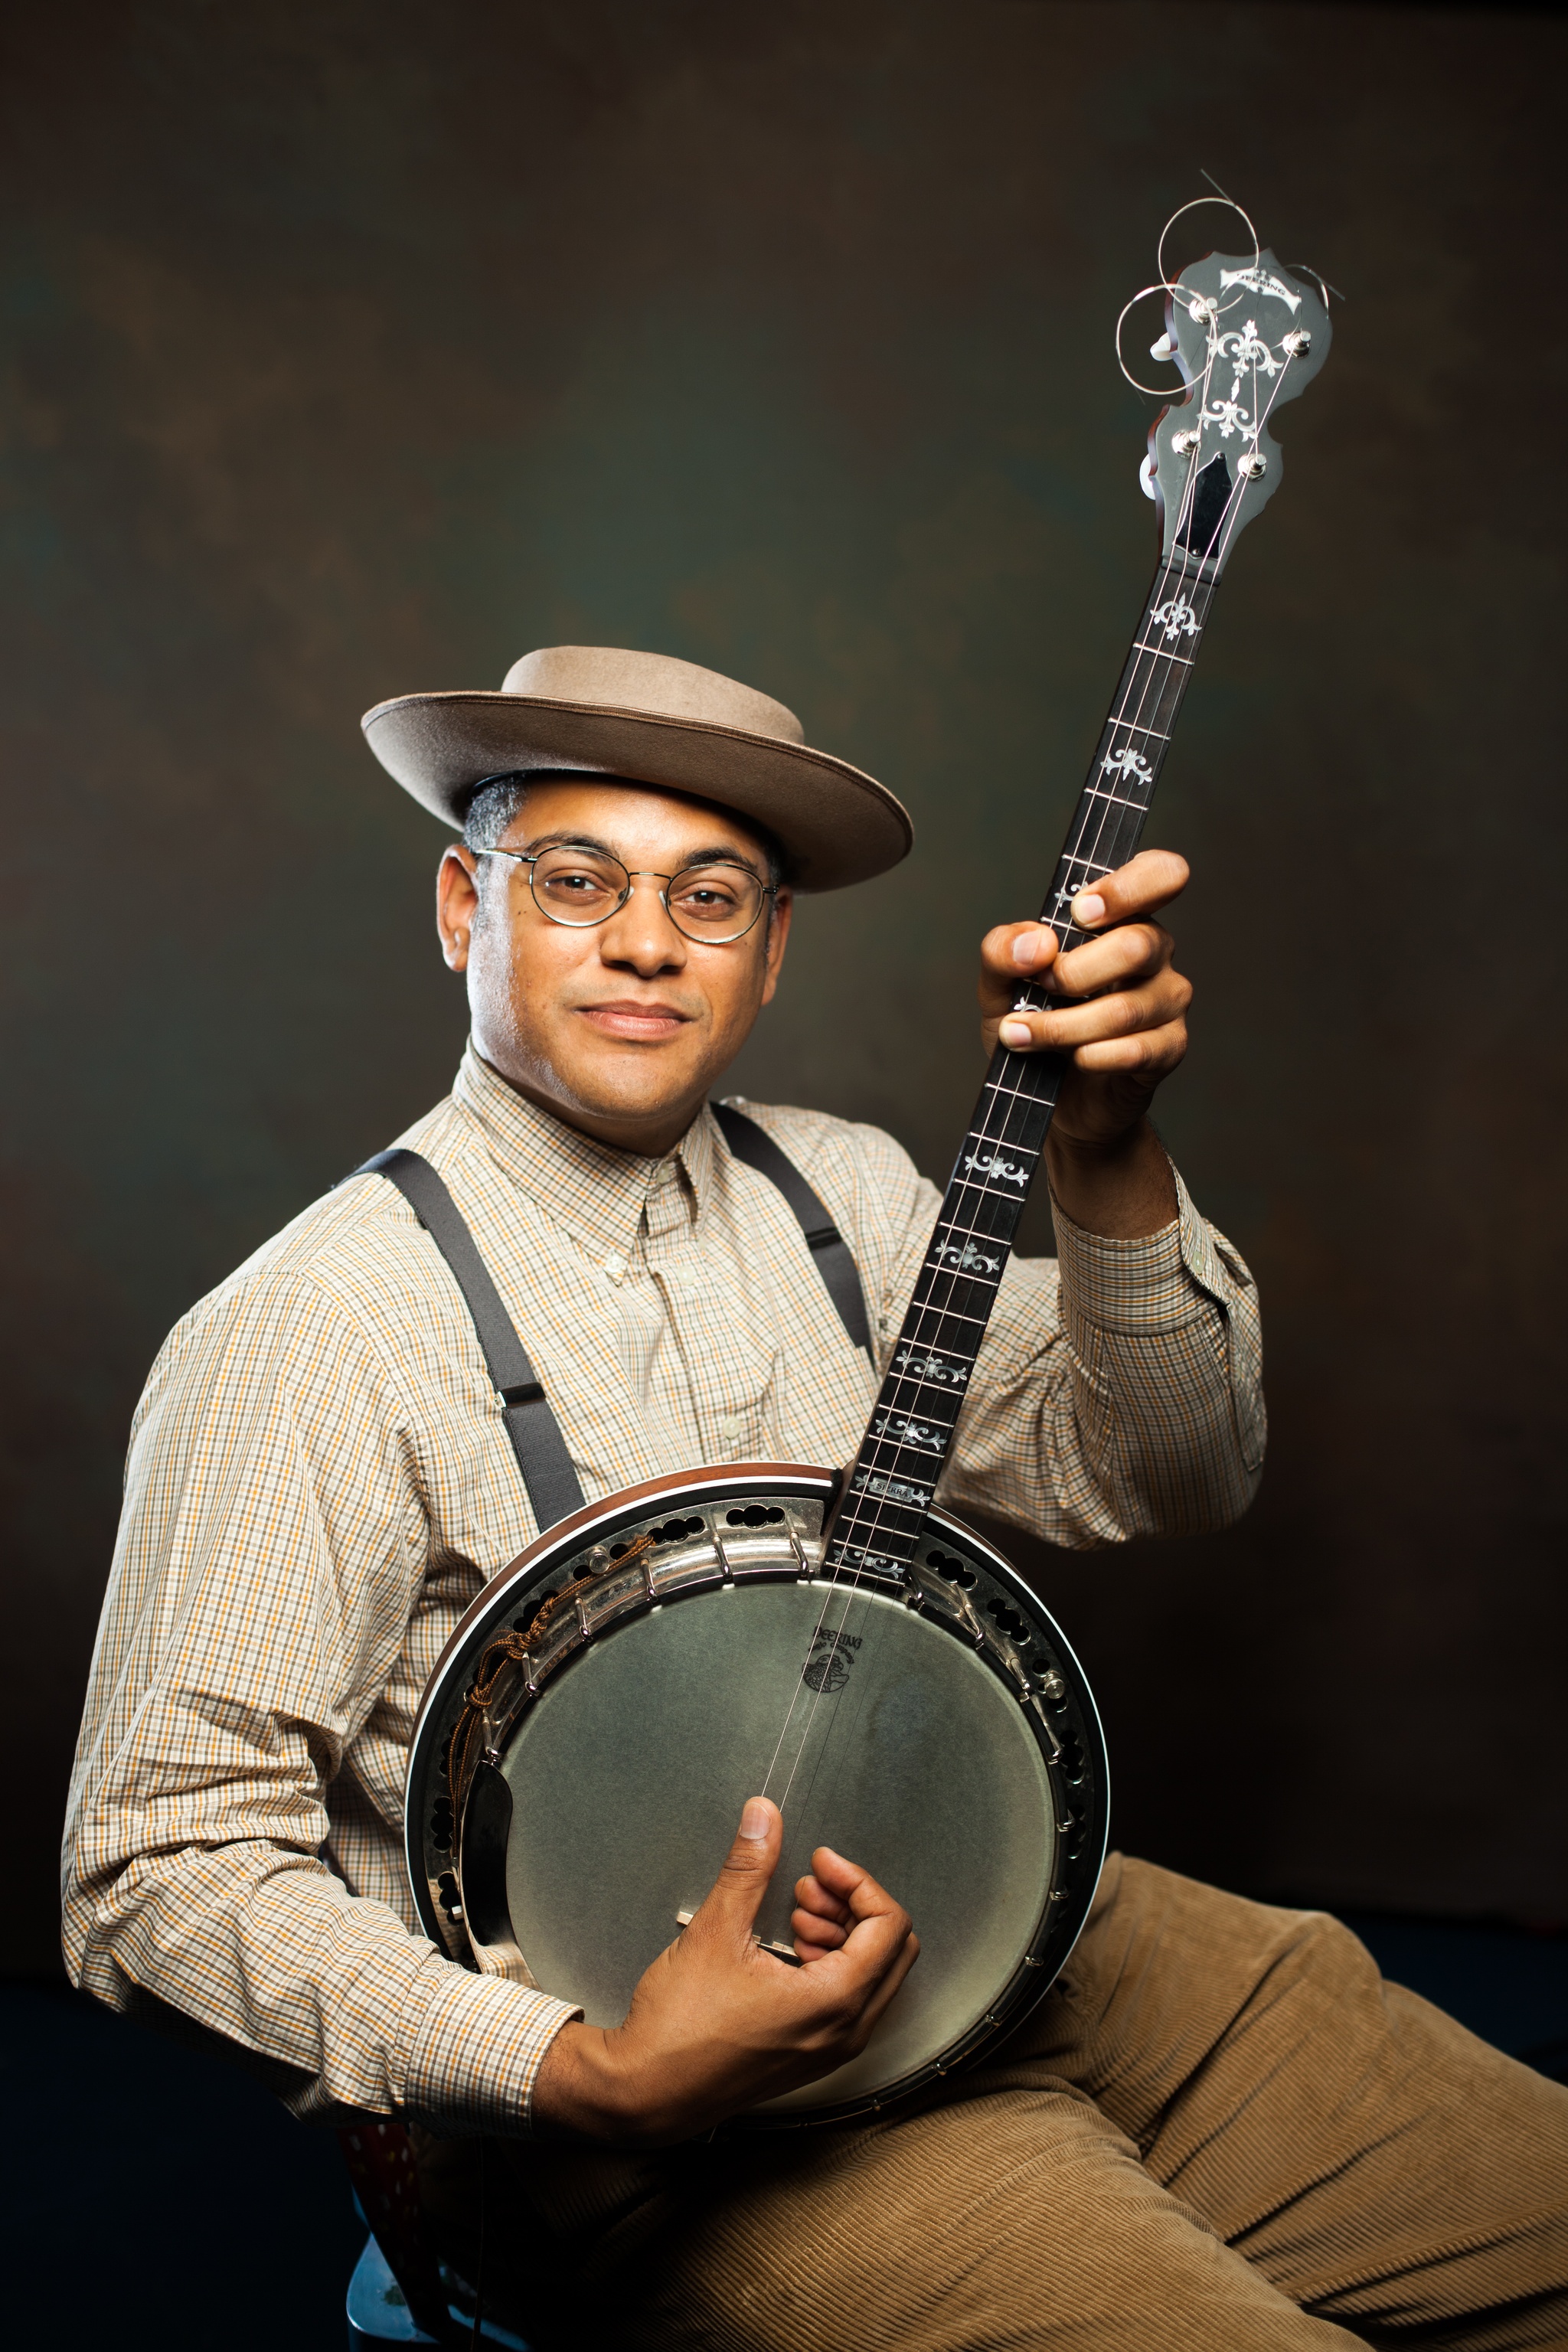 A portrait of Soundtrack of America artist Dom Flemons posing with a string instrument